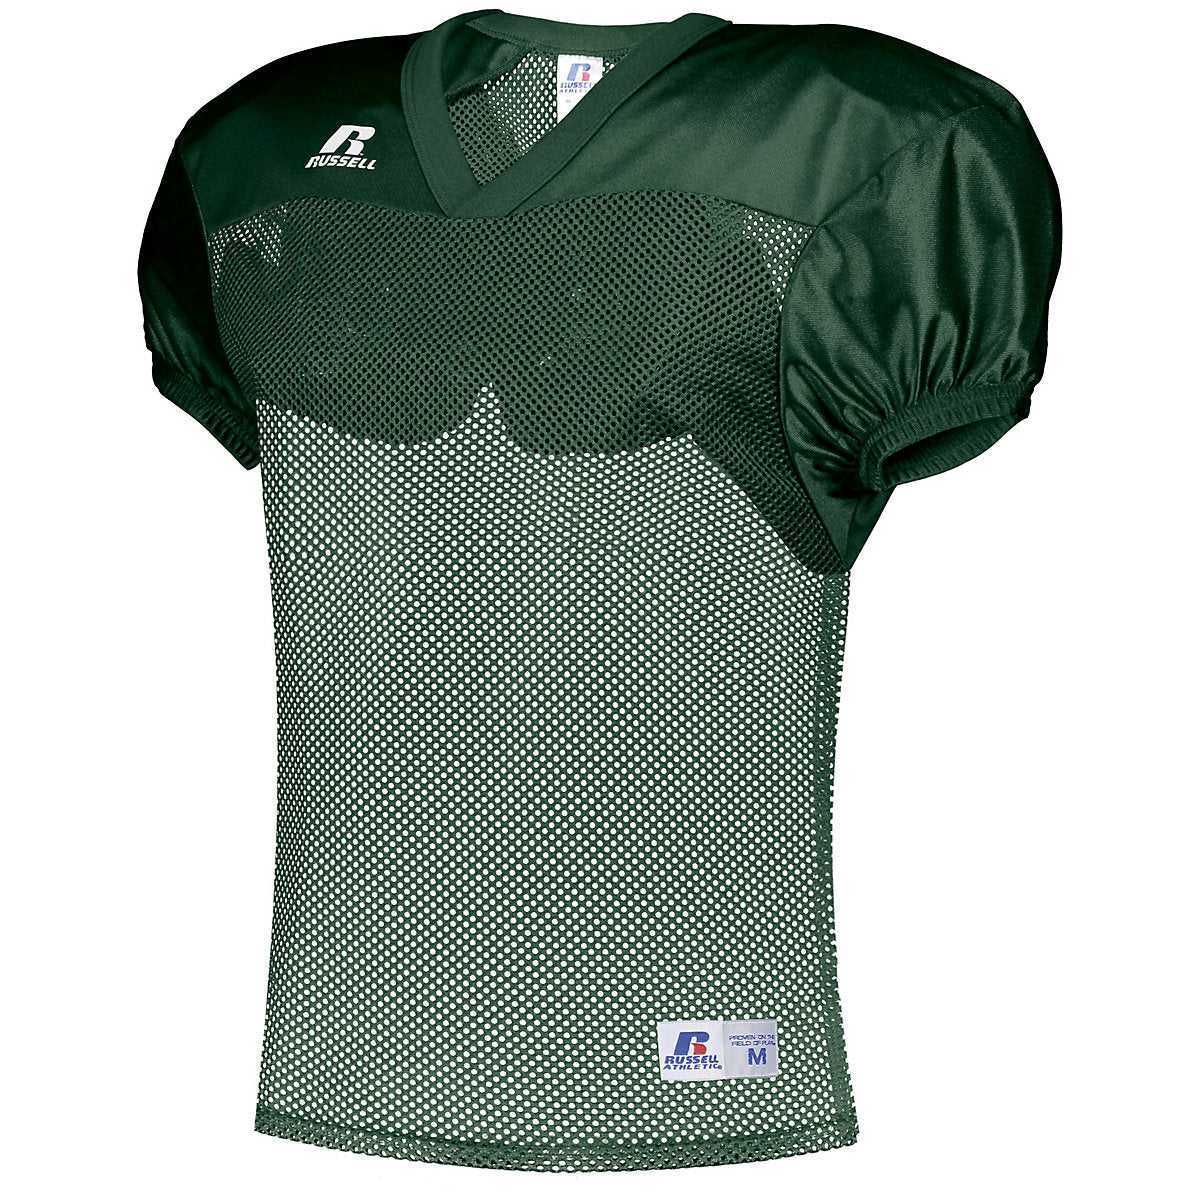 Russell S096BM Stock Practice Jersey - Dark Green - HIT a Double